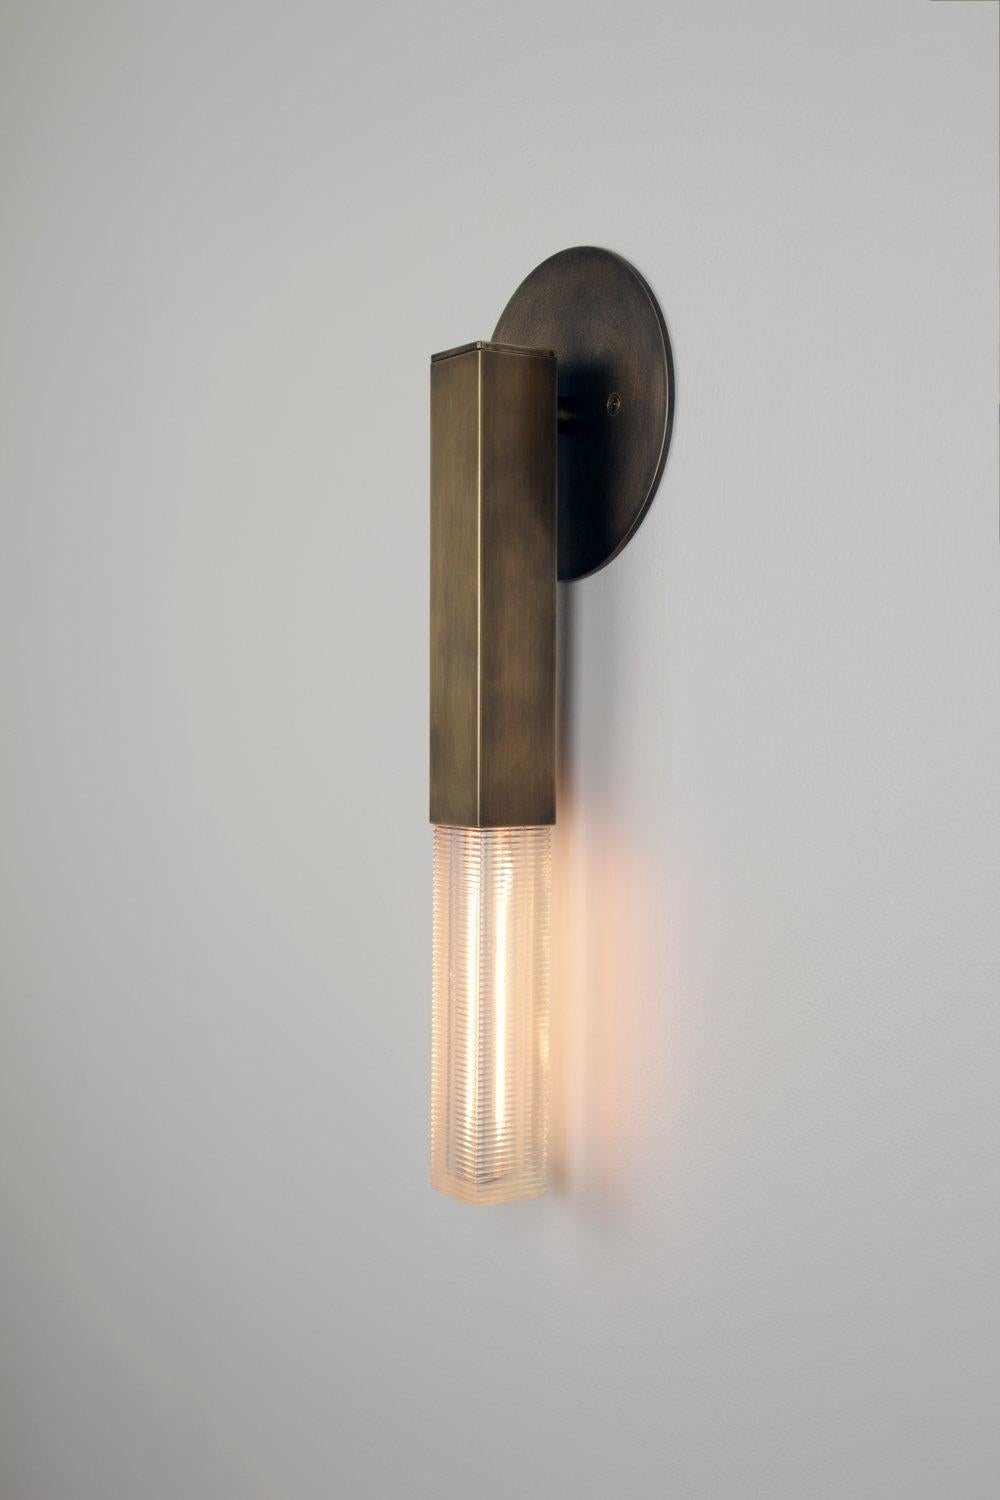 Daikon Studio  POST Full Sconce 

The Post Full Sconce celebrates the poetic dialogue between light and form to create a fixture that leans into the timeless and iconic. Meticulously crafted by hand in our studios. Horizontal or vertical